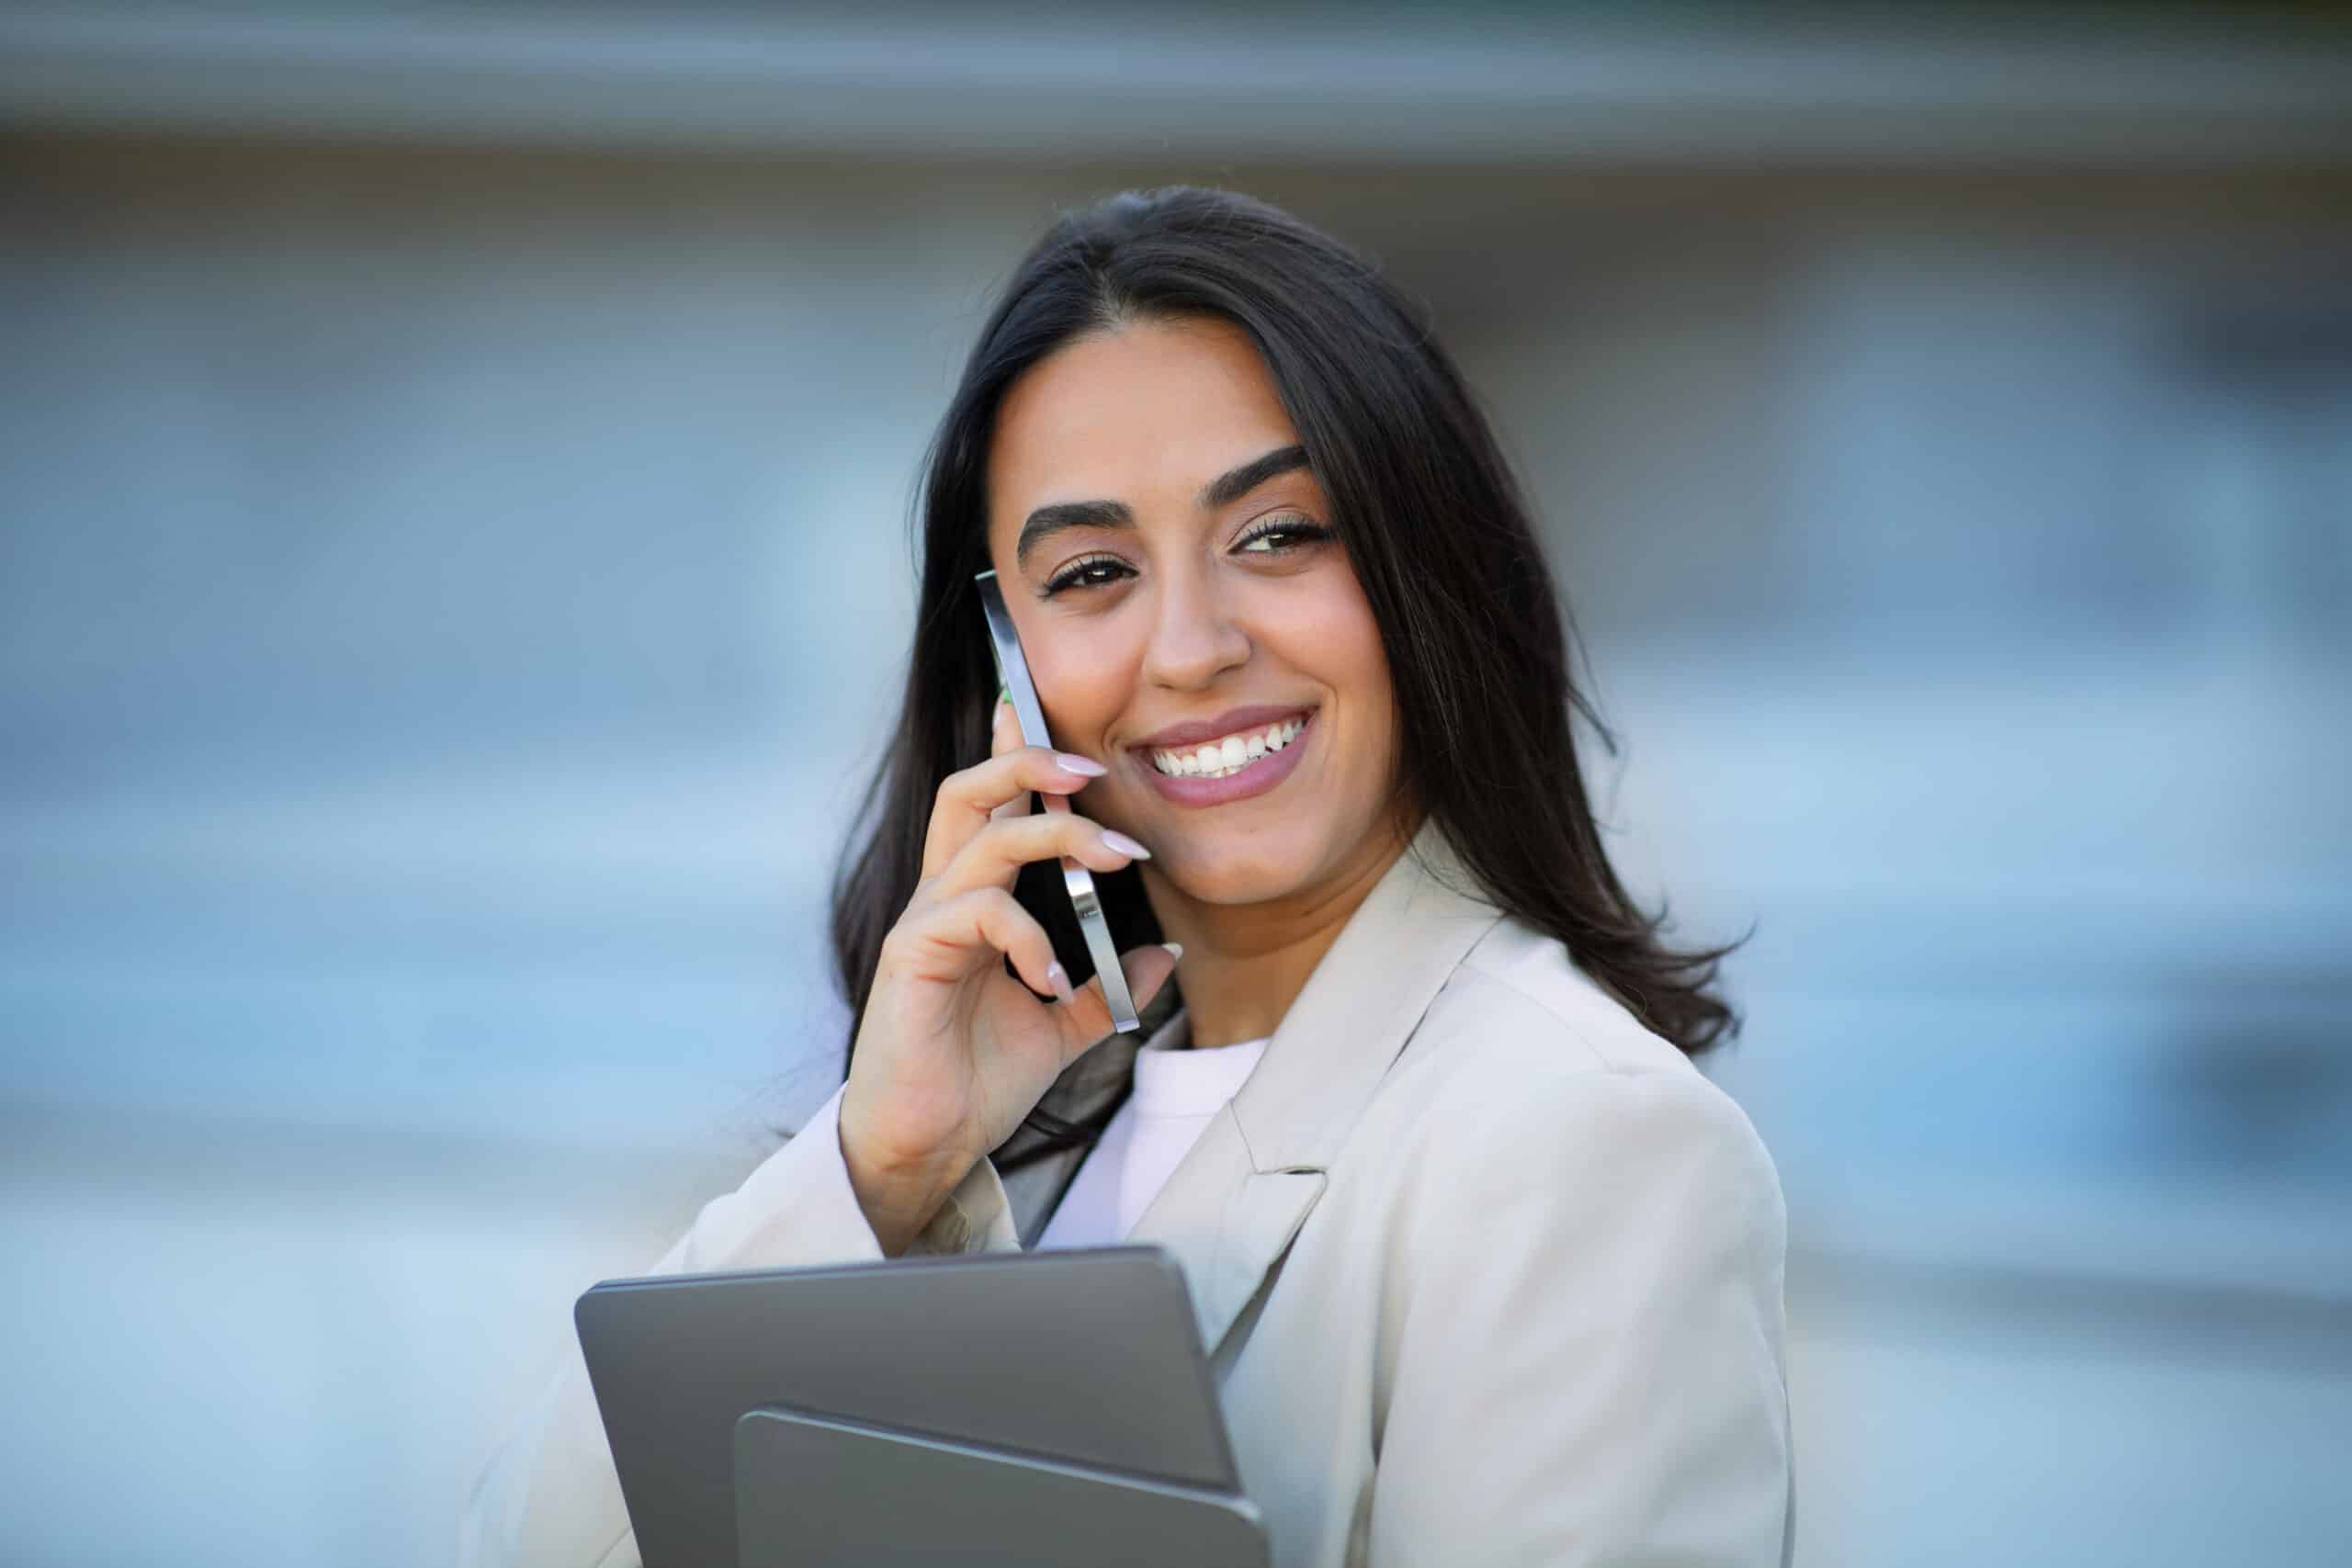 Professional Communication. Portrait of attractive hispanic business lady smiling while communicating on her cellphone outdoors near business center, holding tablet and laptop